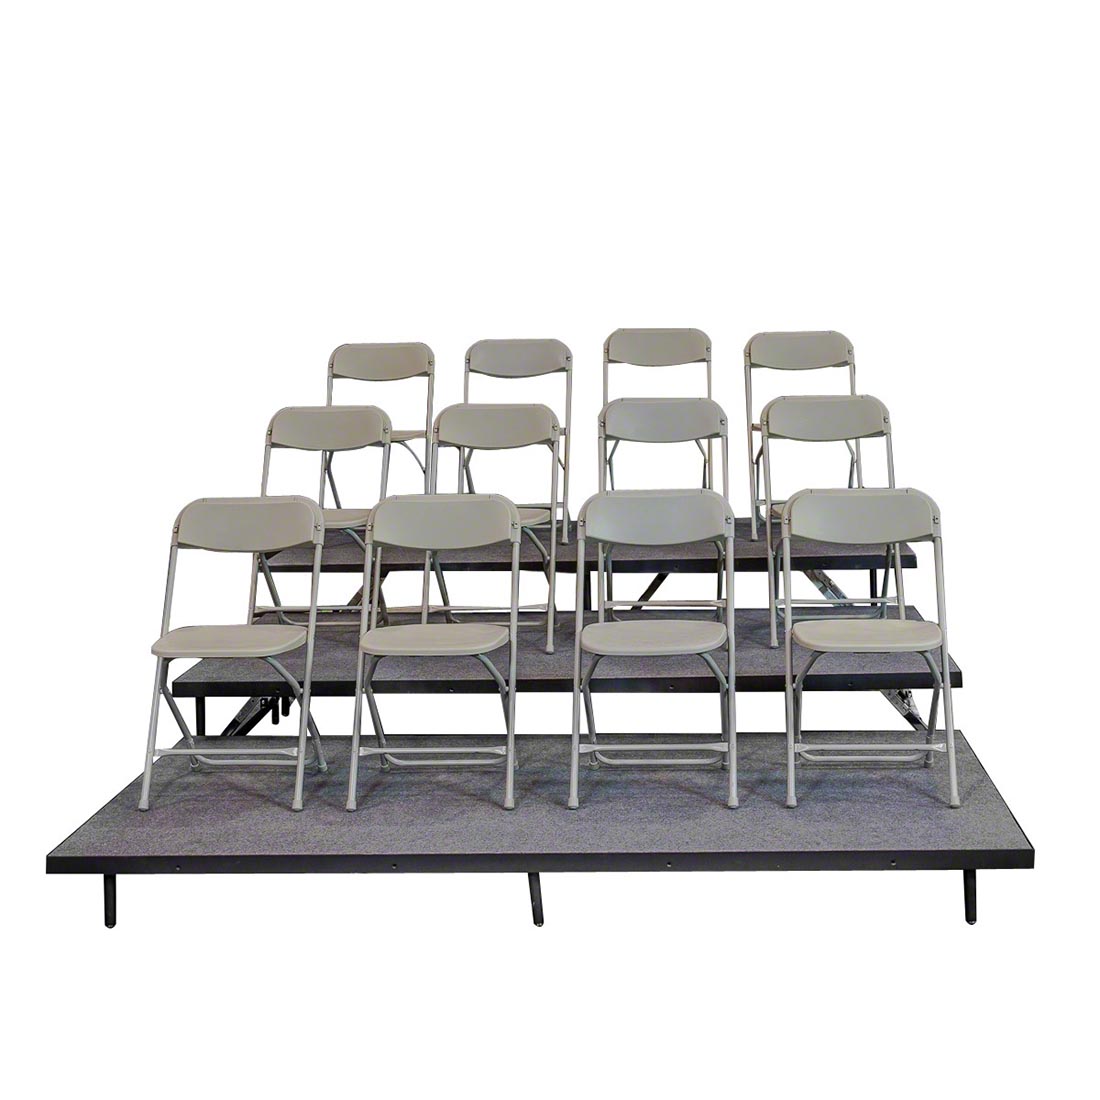 Staging 101 3-Tier 24' Seated Riser (Fits 36 Chairs)